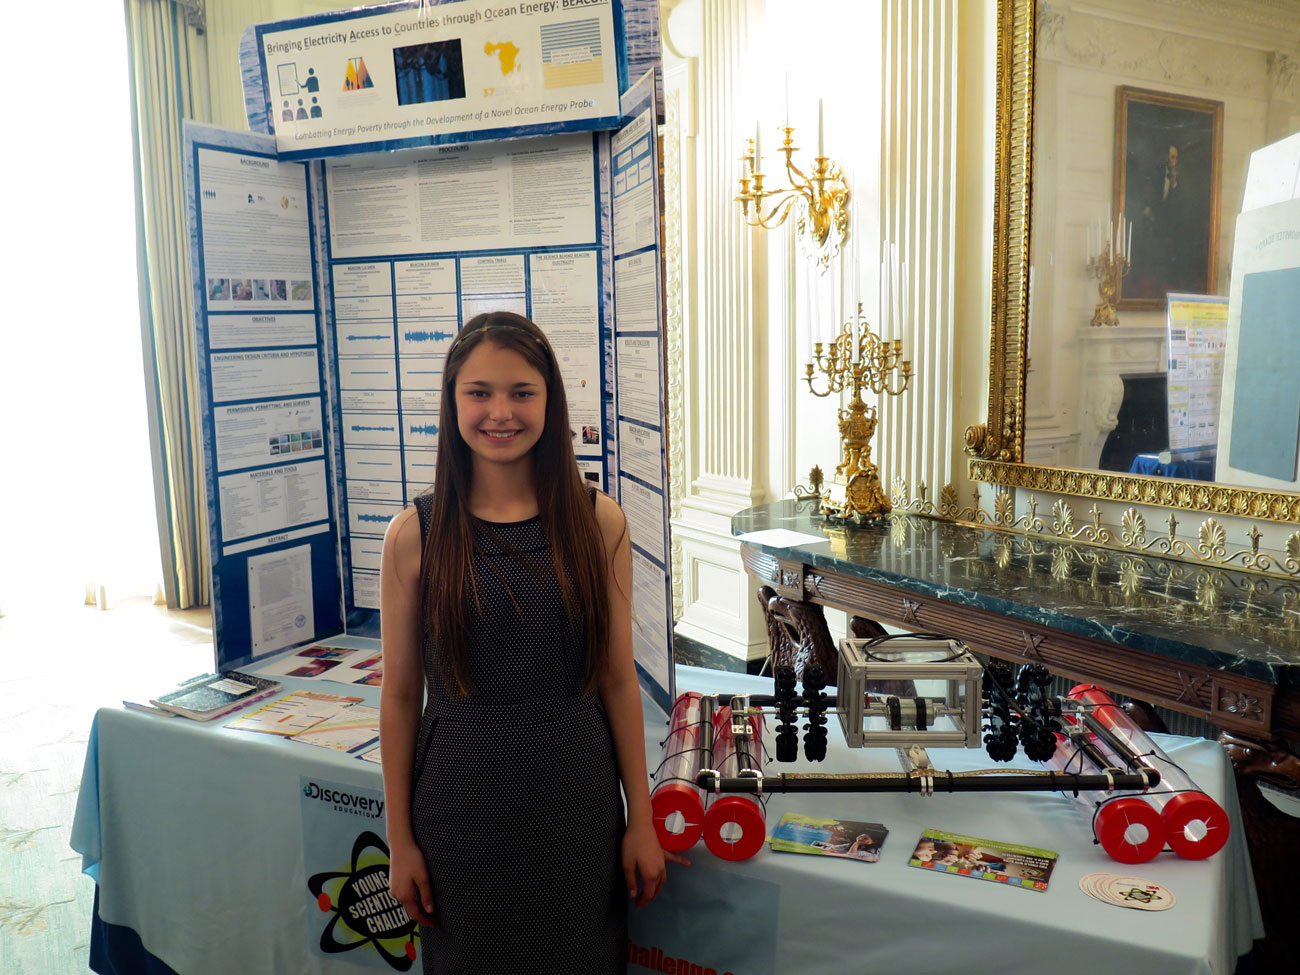 Florida high schooler makes waves at White House Science Fair